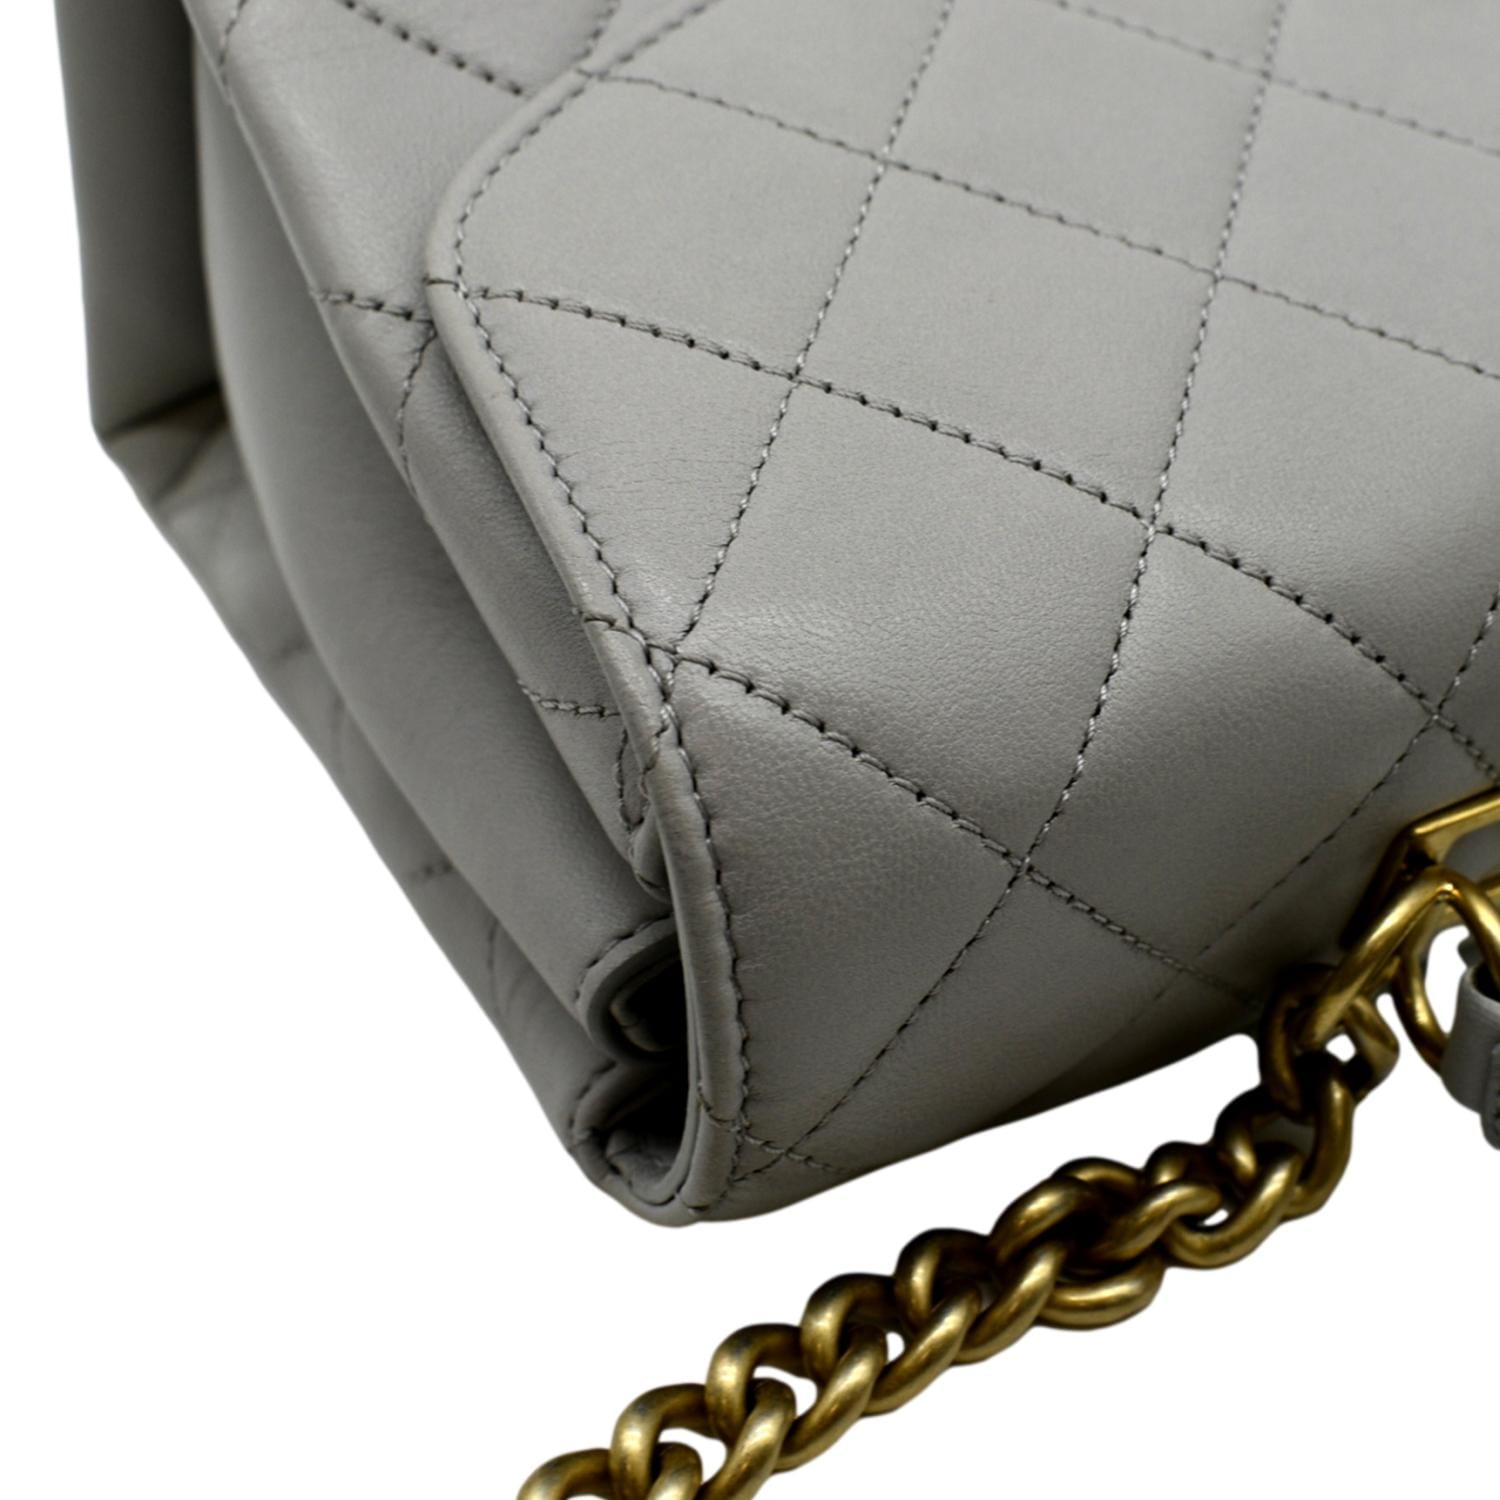 Chanel Classic Lambskin Leather Double Flap Bag (SHG-34550) – LuxeDH